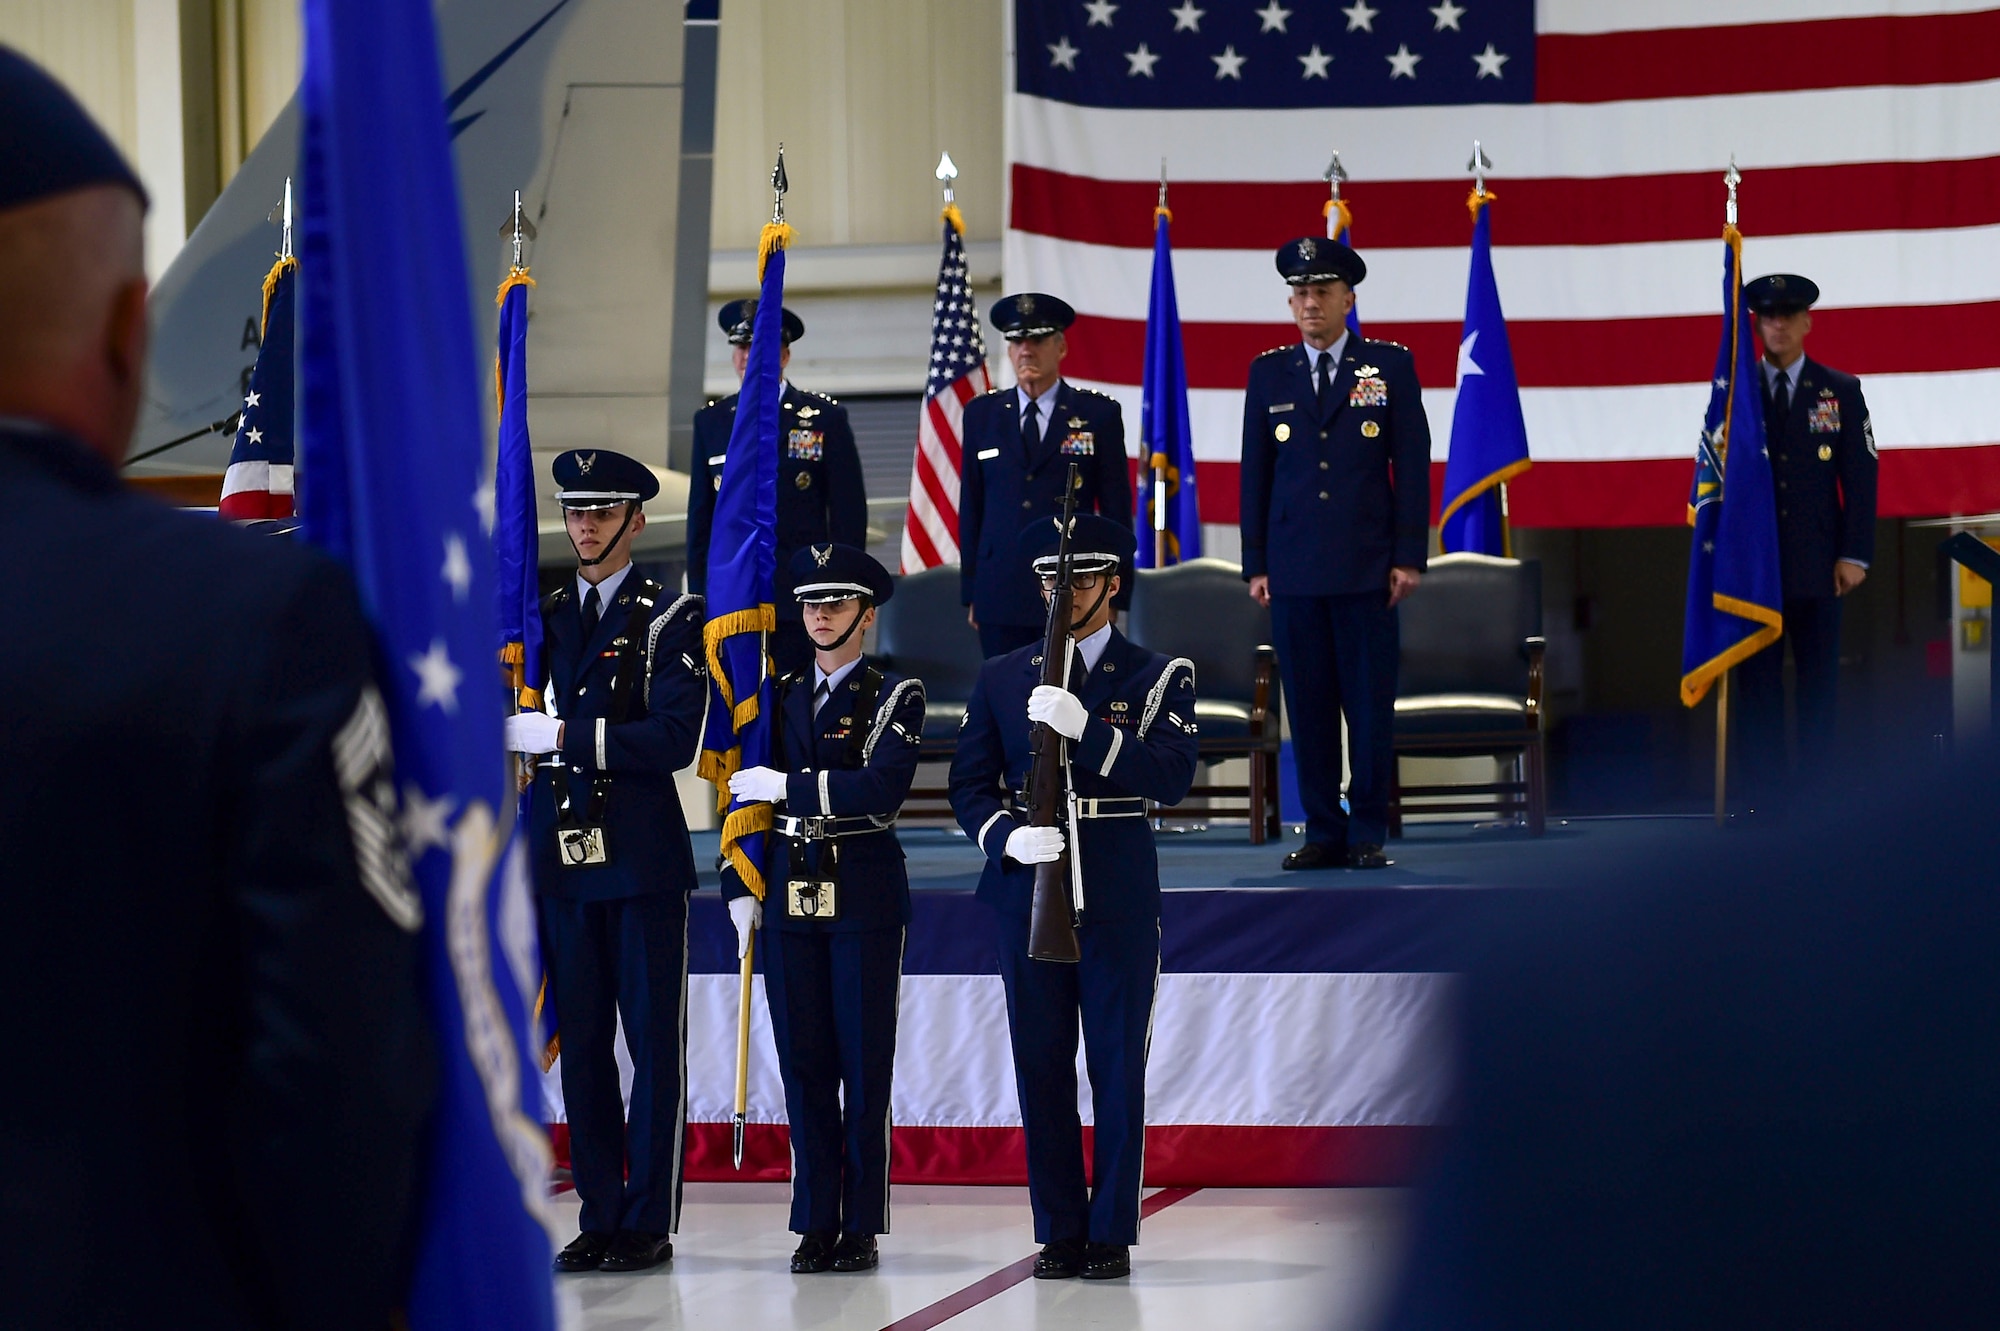 Langley Air Force Base Honor Guard members present the colors at the Air Combat Command Change of Command ceremony at Joint Base Langley-Eustis, Va., March 10, 2017. U.S. Air Force Gen. James M. Holmes assumed command of ACC from Gen. Herbert “Hawk” Carlisle, who retiresd after 395 years of service to the Air Force. (U.S. Air Force photo by Senior Airman Kimberly Nagle)